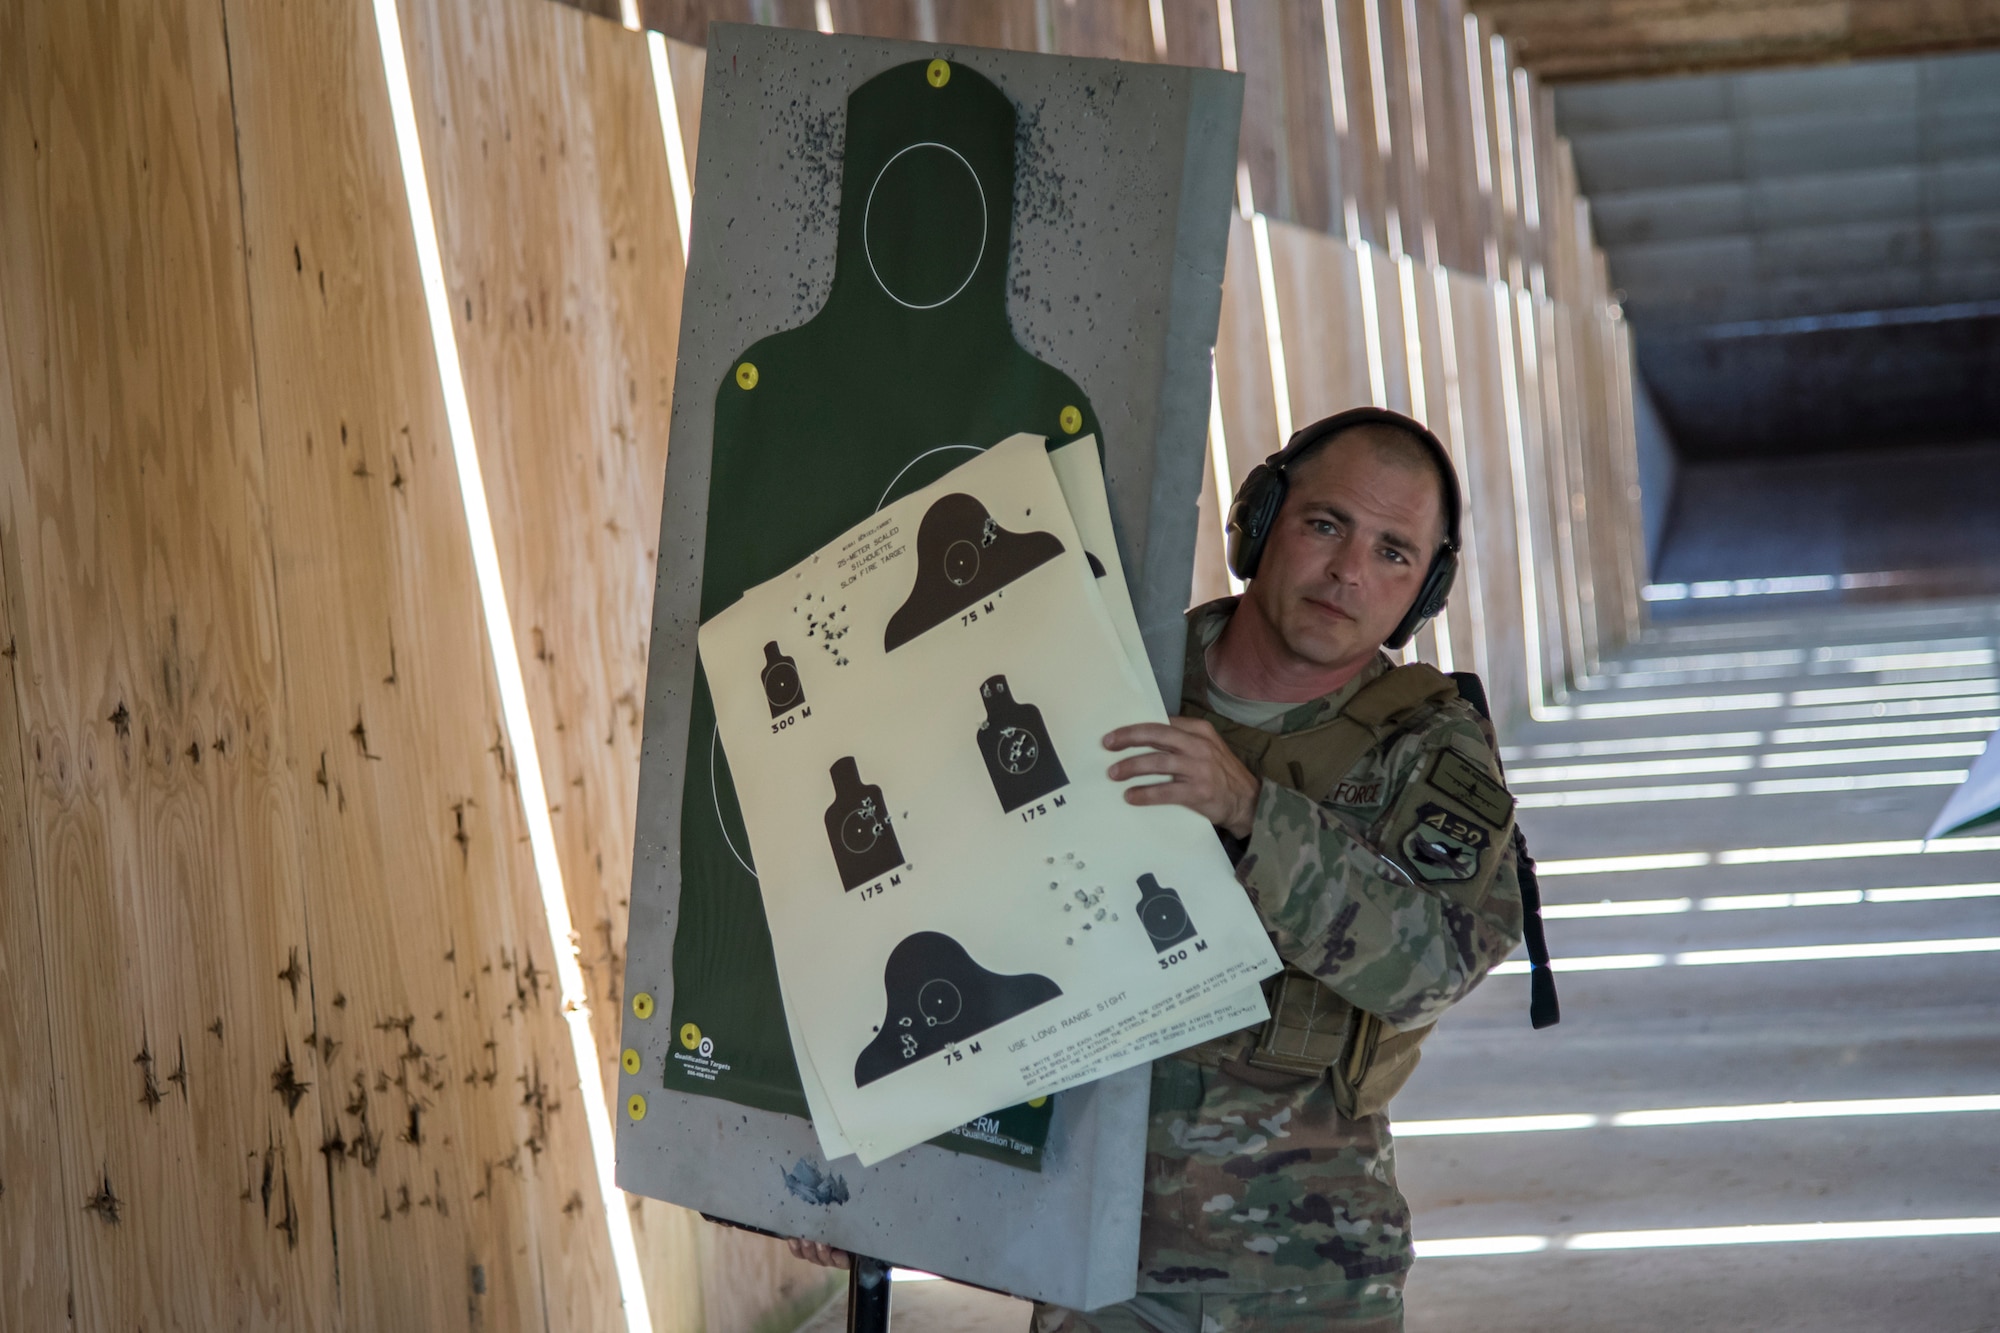 Master Sgt. Mickey Barton, 81st Fighter Squadron weapons air advisor, carries his target sheet during a Combat Arms Training and Maintenance (CATM) class, April 3, 2018, at Moody Air Force Base, Ga. Airmen must demonstrate quality safety standards while handling and shooting their weapons proficiently in order to be eligible to deploy. Throughout the class the instructors emphasized: weapon handling techniques, proper sight usage and internal weapon cleaning procedures.   (U.S. Air Force photo by Airman Eugene Oliver)